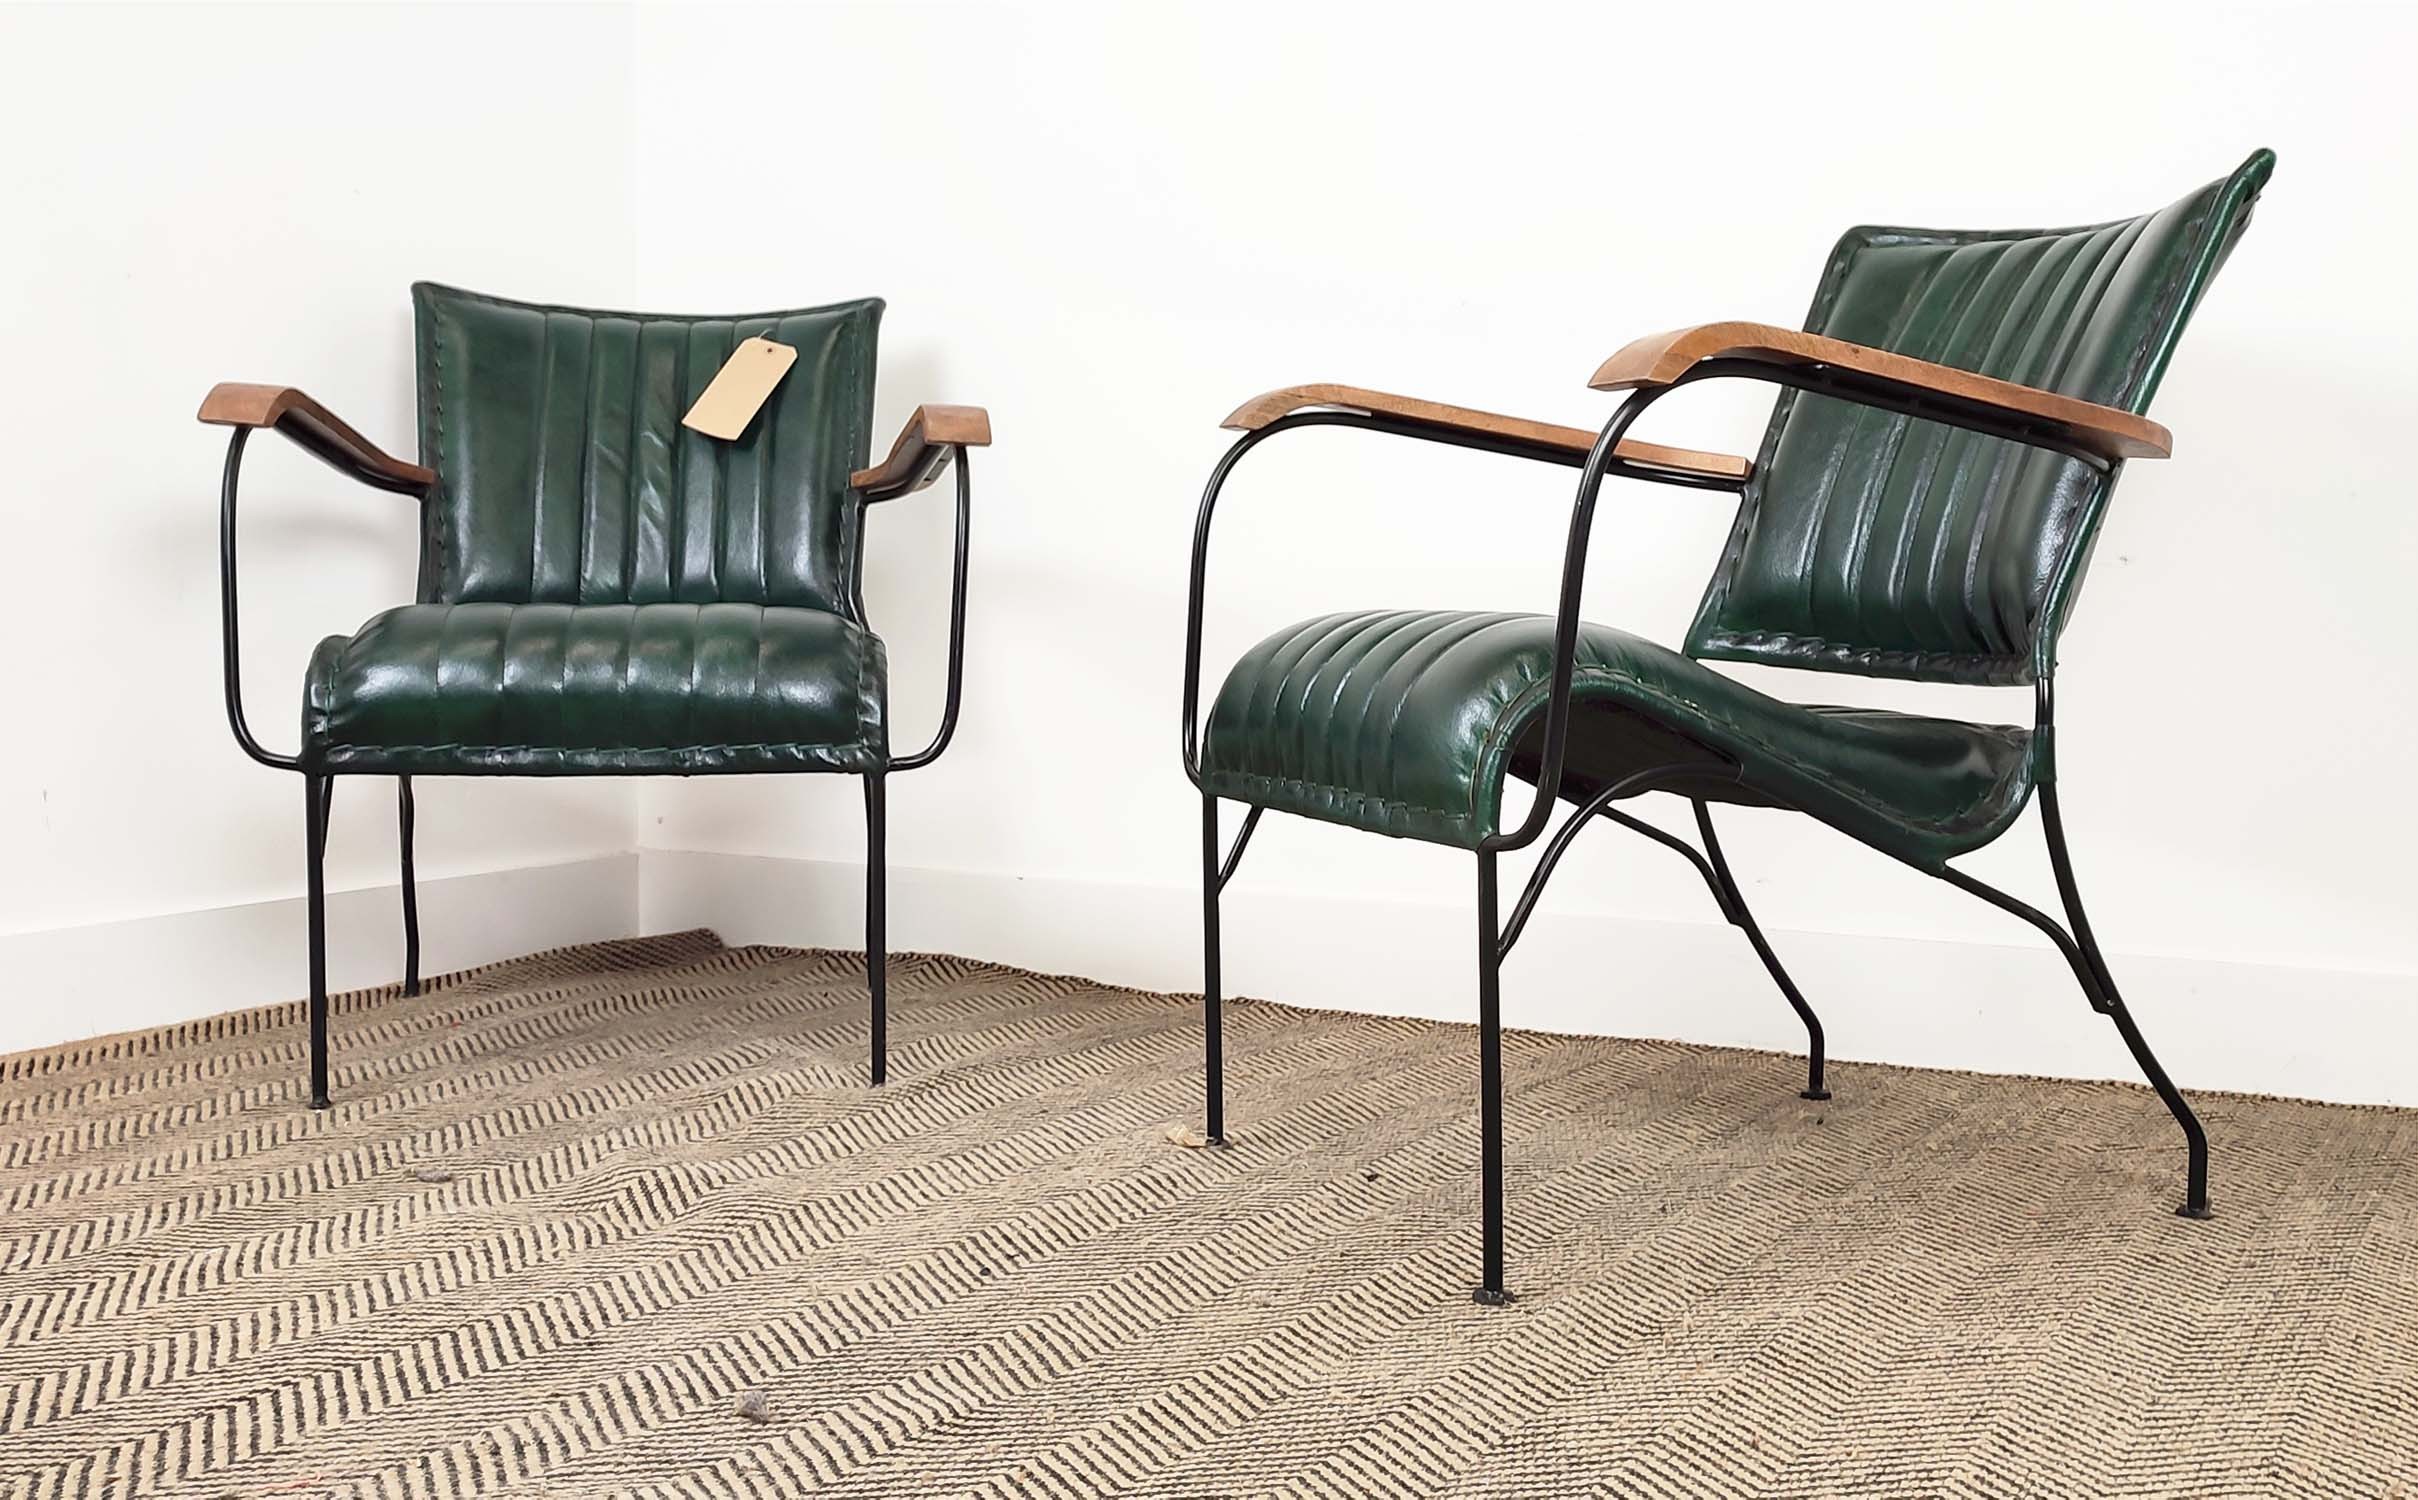 ARMCHAIRS, a pair, green leather upholstery with wooden arms and metal supports, 65cm x 75cm H x - Image 2 of 7